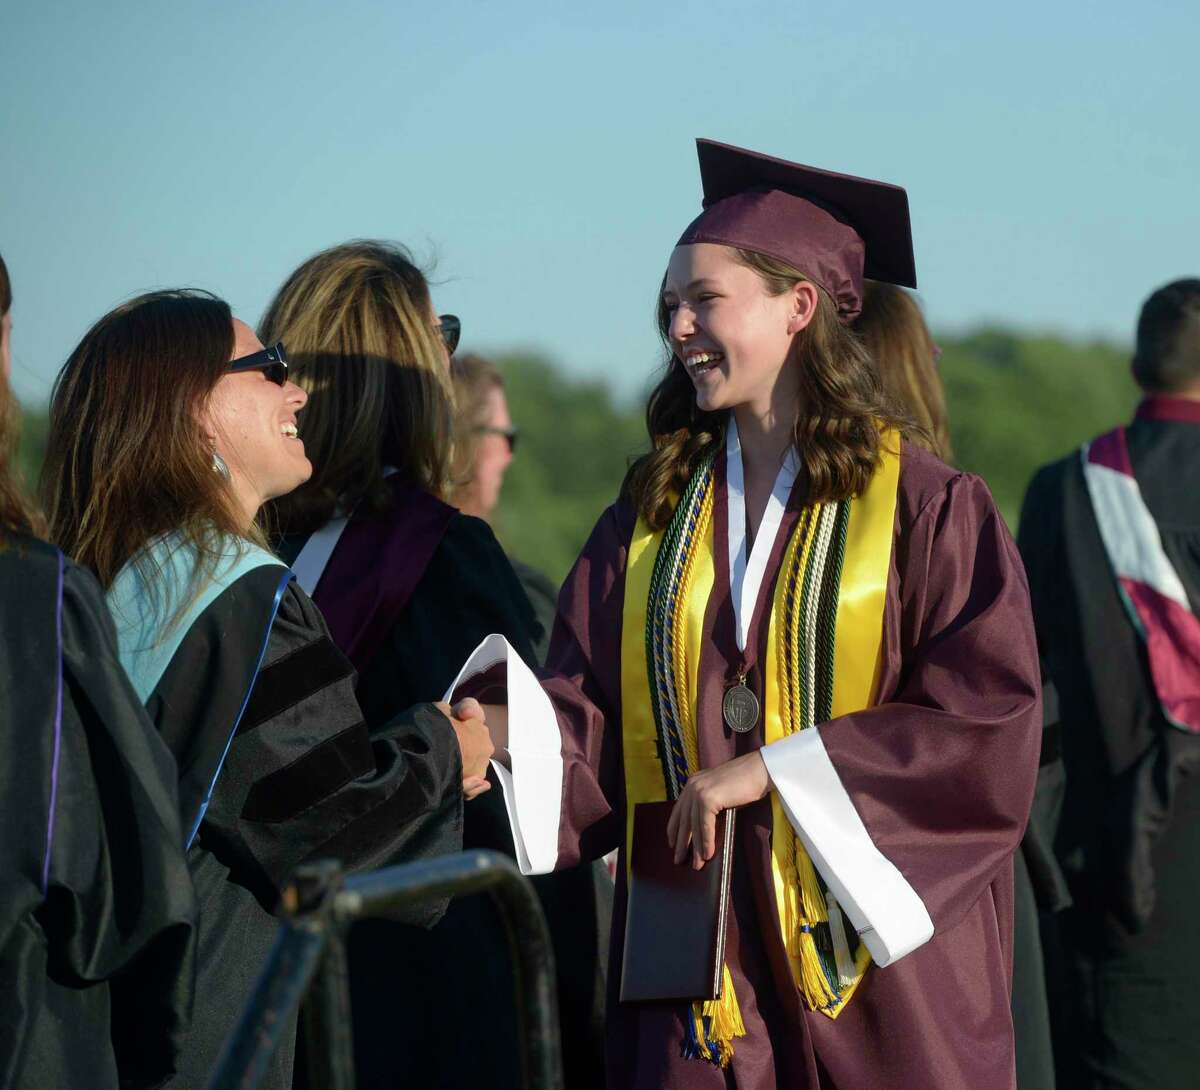 Kayleigh Margaret Cooke was all smiles after receiving her diploma during the 2022 Bethel High School Graduation, Friday, June 17, 2022, Bethel, Conn.